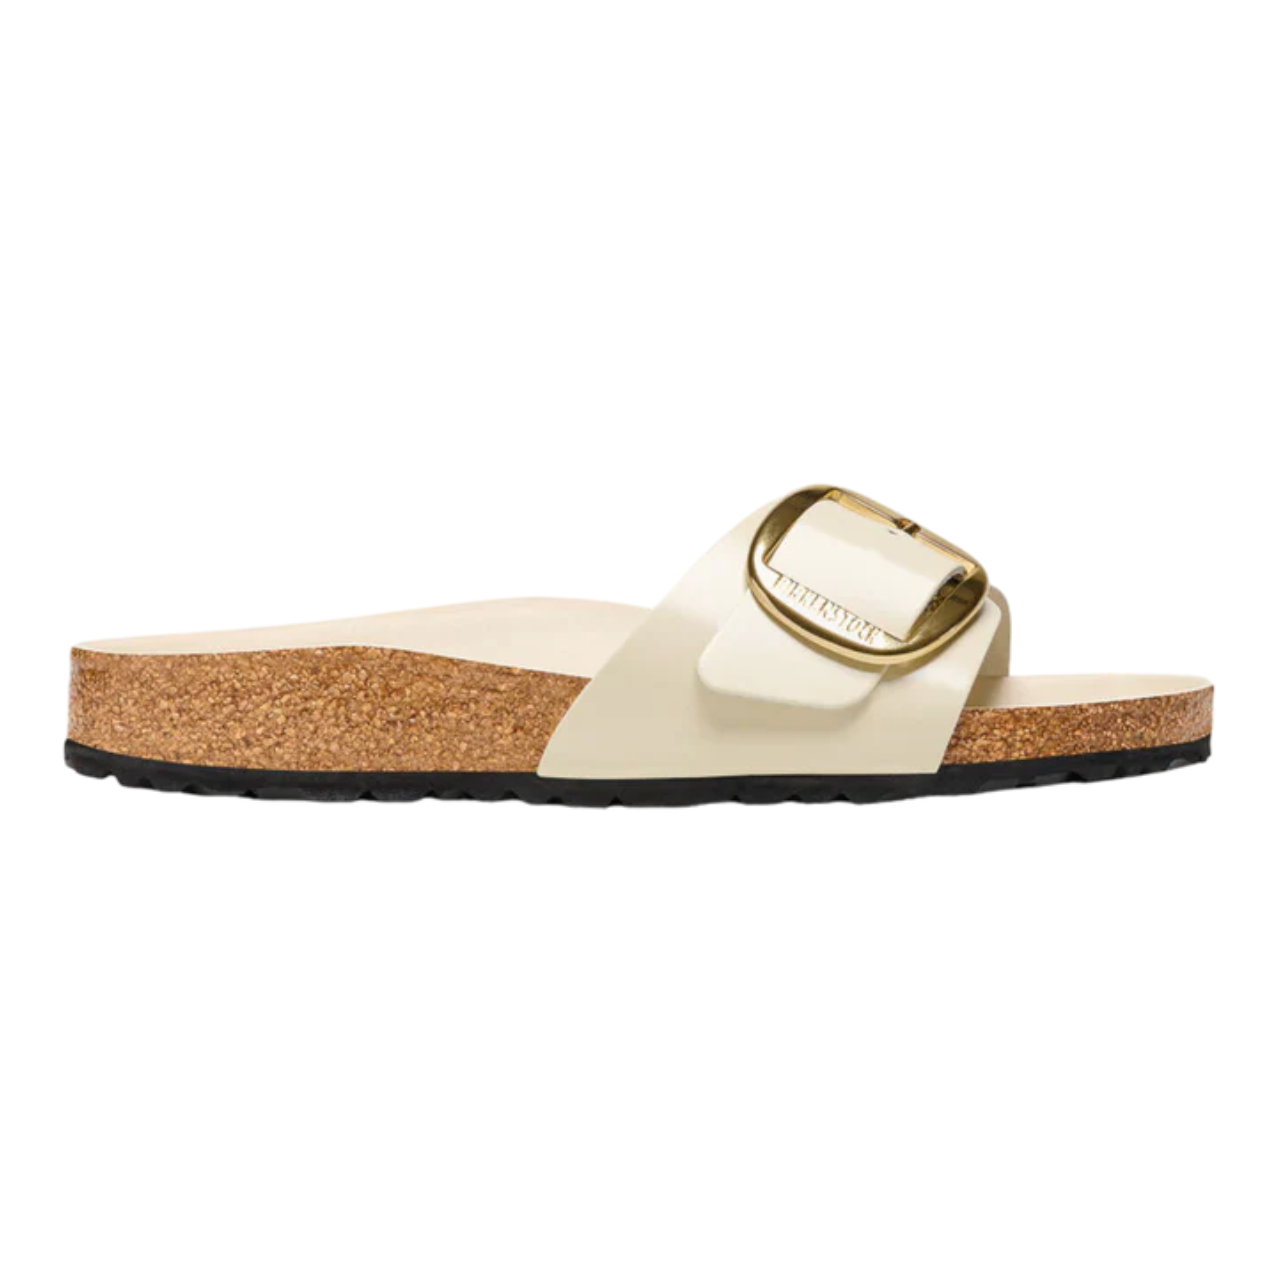 Birkenstock Slide in natural leather and a big gold buckle